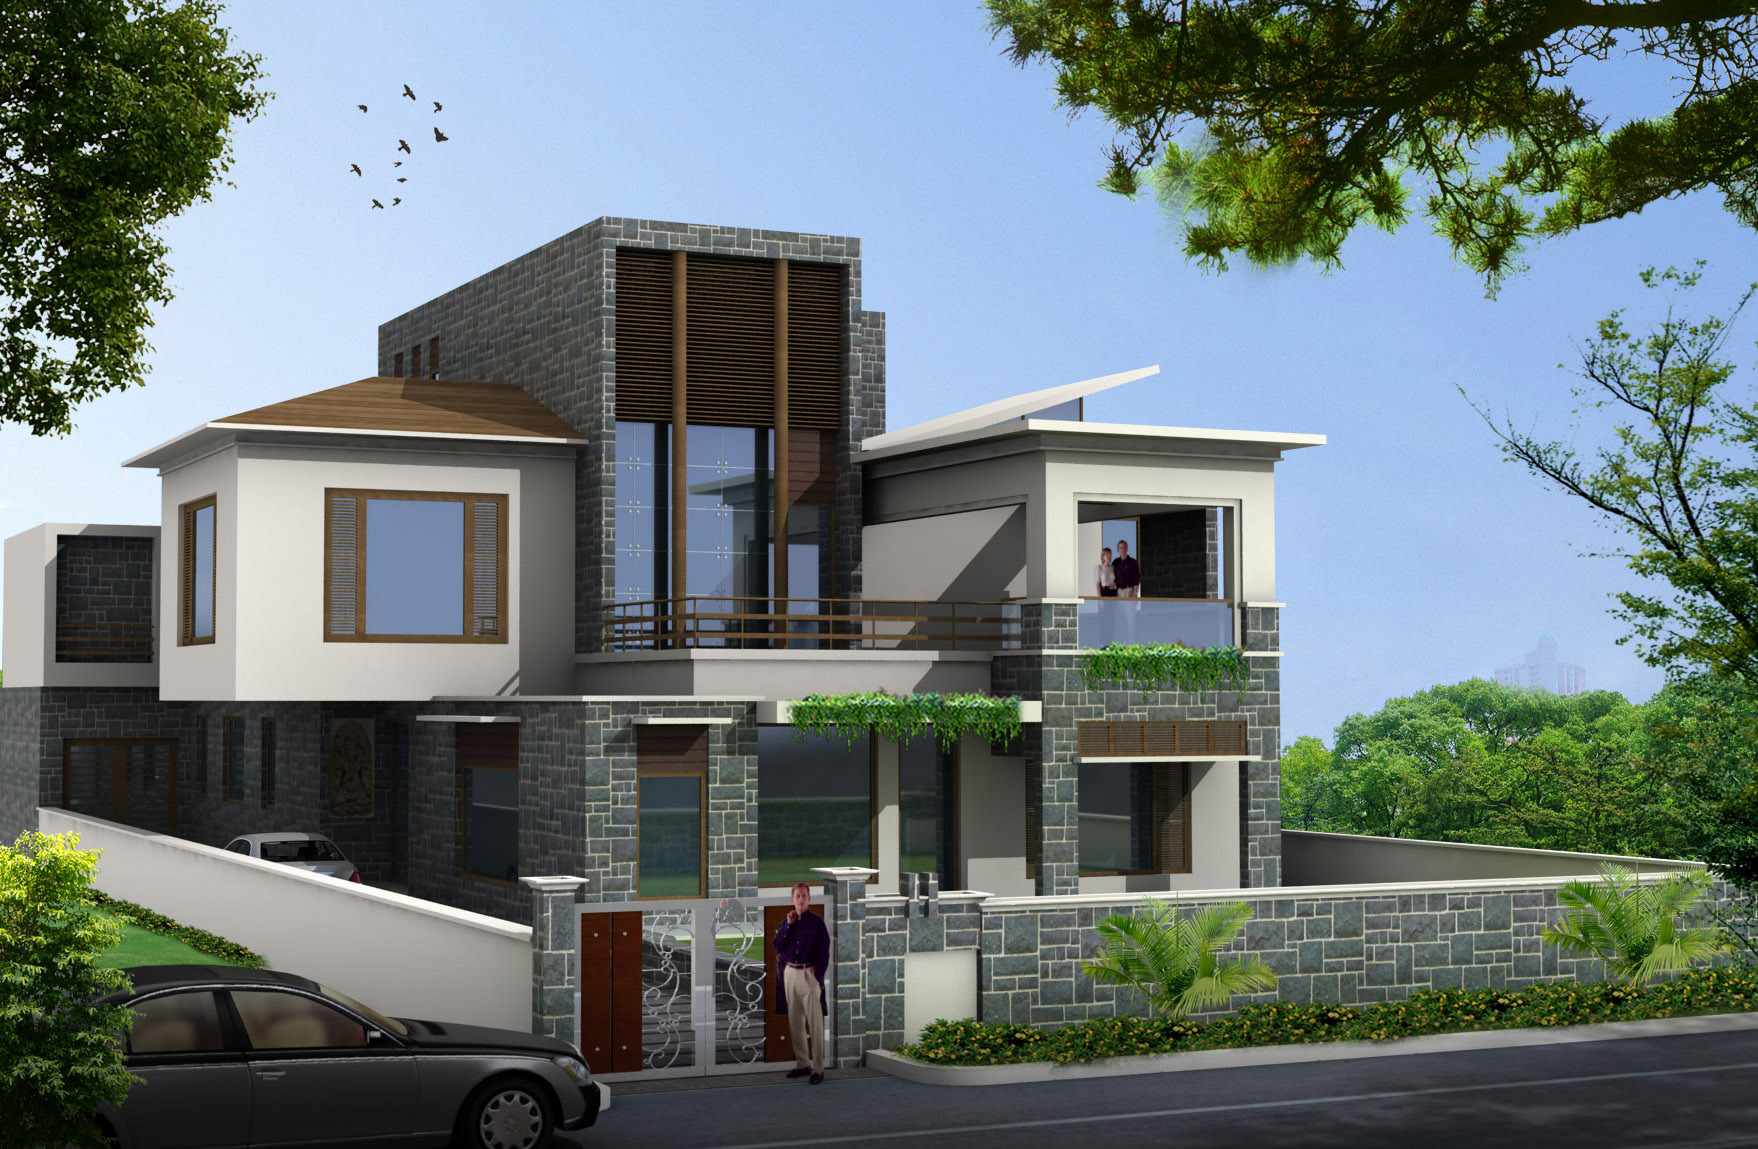 house front elevation design pictures Home Design Get House Front Elevation Design Pictures PNG